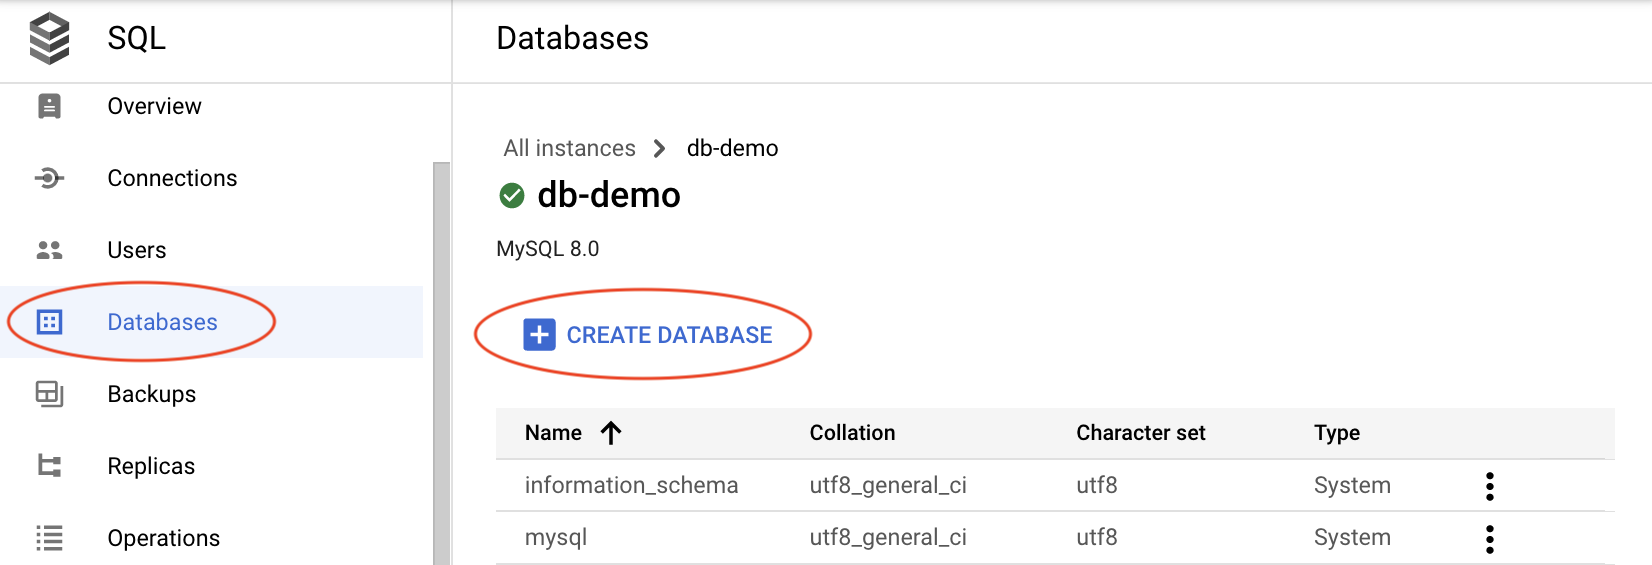 image to create a database